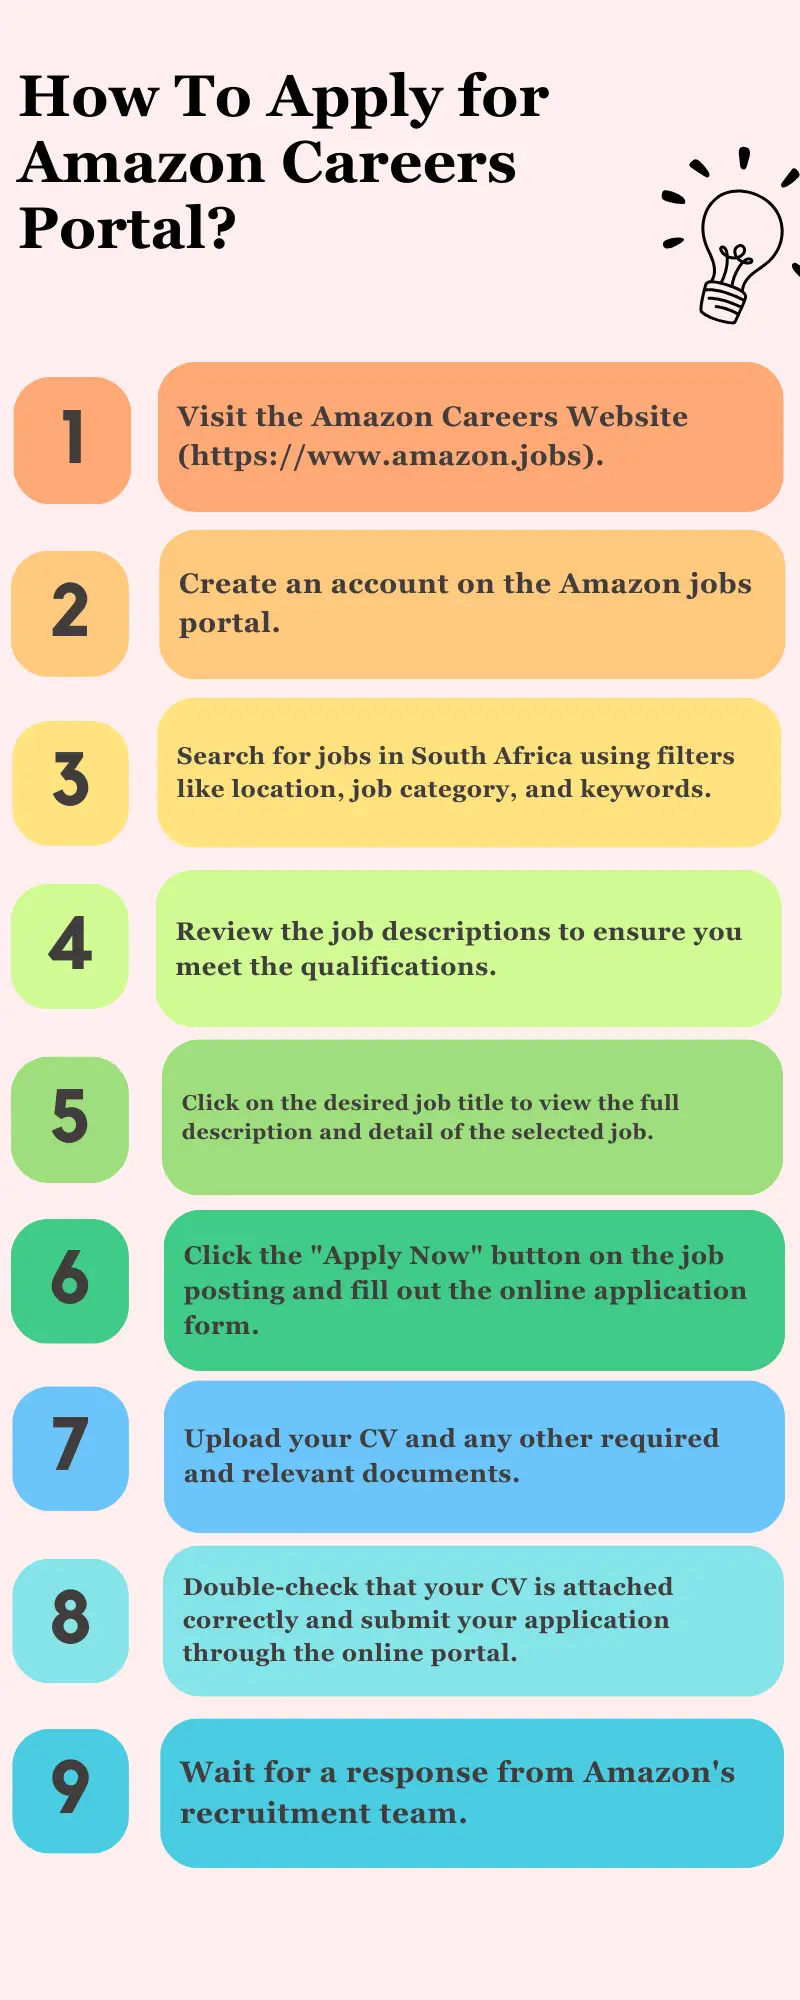 How To Apply for Amazon Careers Portal?